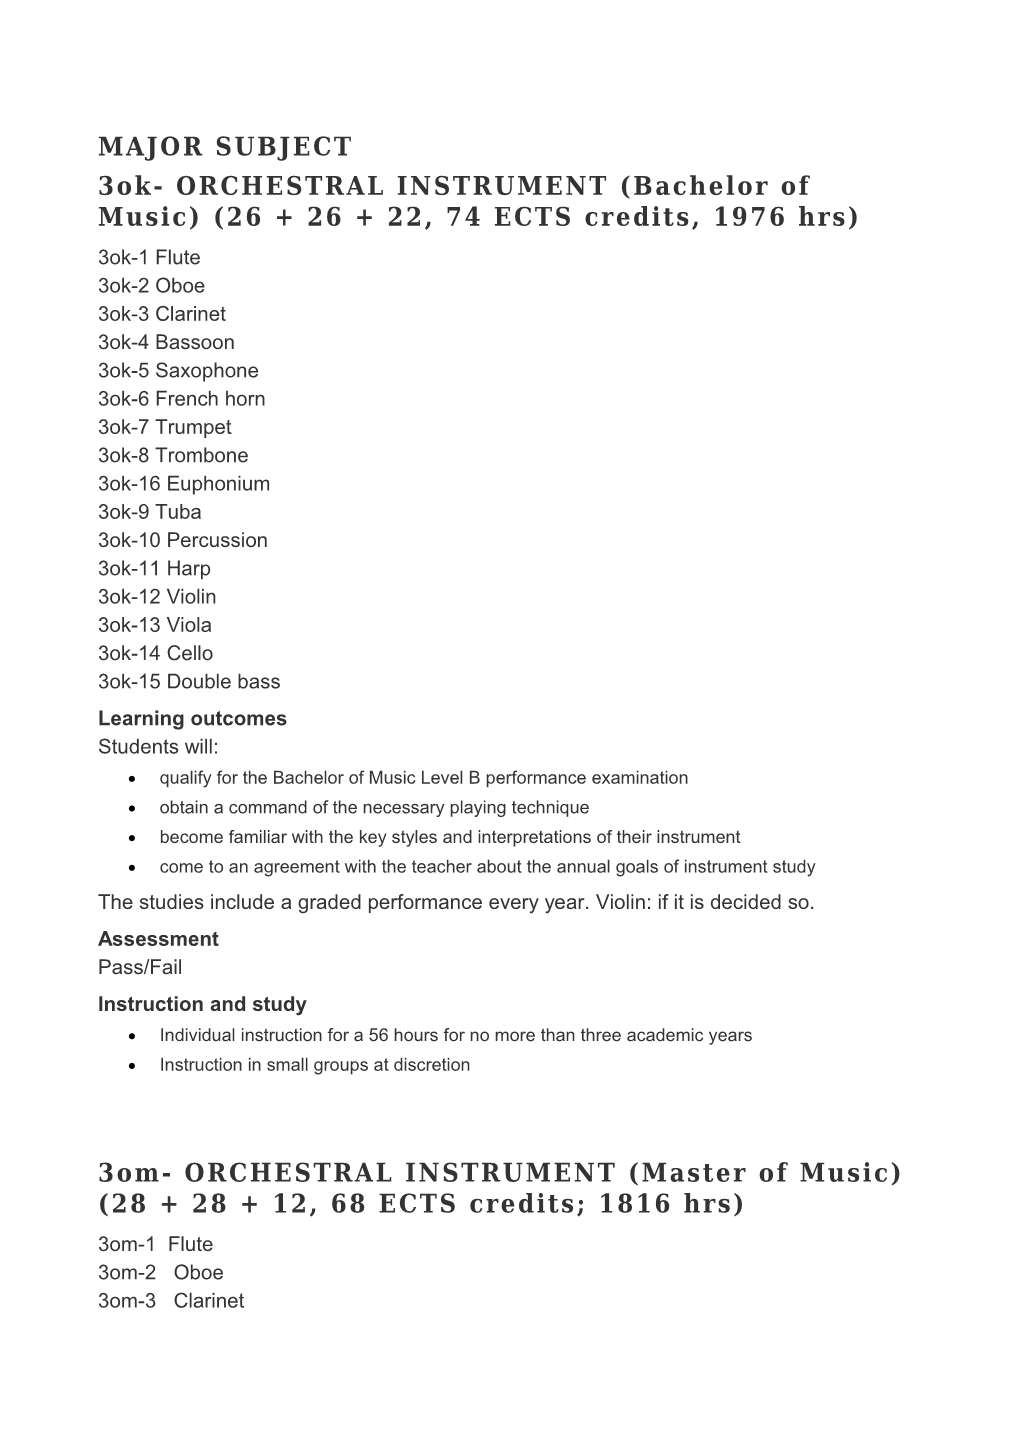 3Ok- ORCHESTRAL INSTRUMENT (Bachelor of Music) (26 + 26 + 22, 74 ECTS Credits, 1976 Hrs)